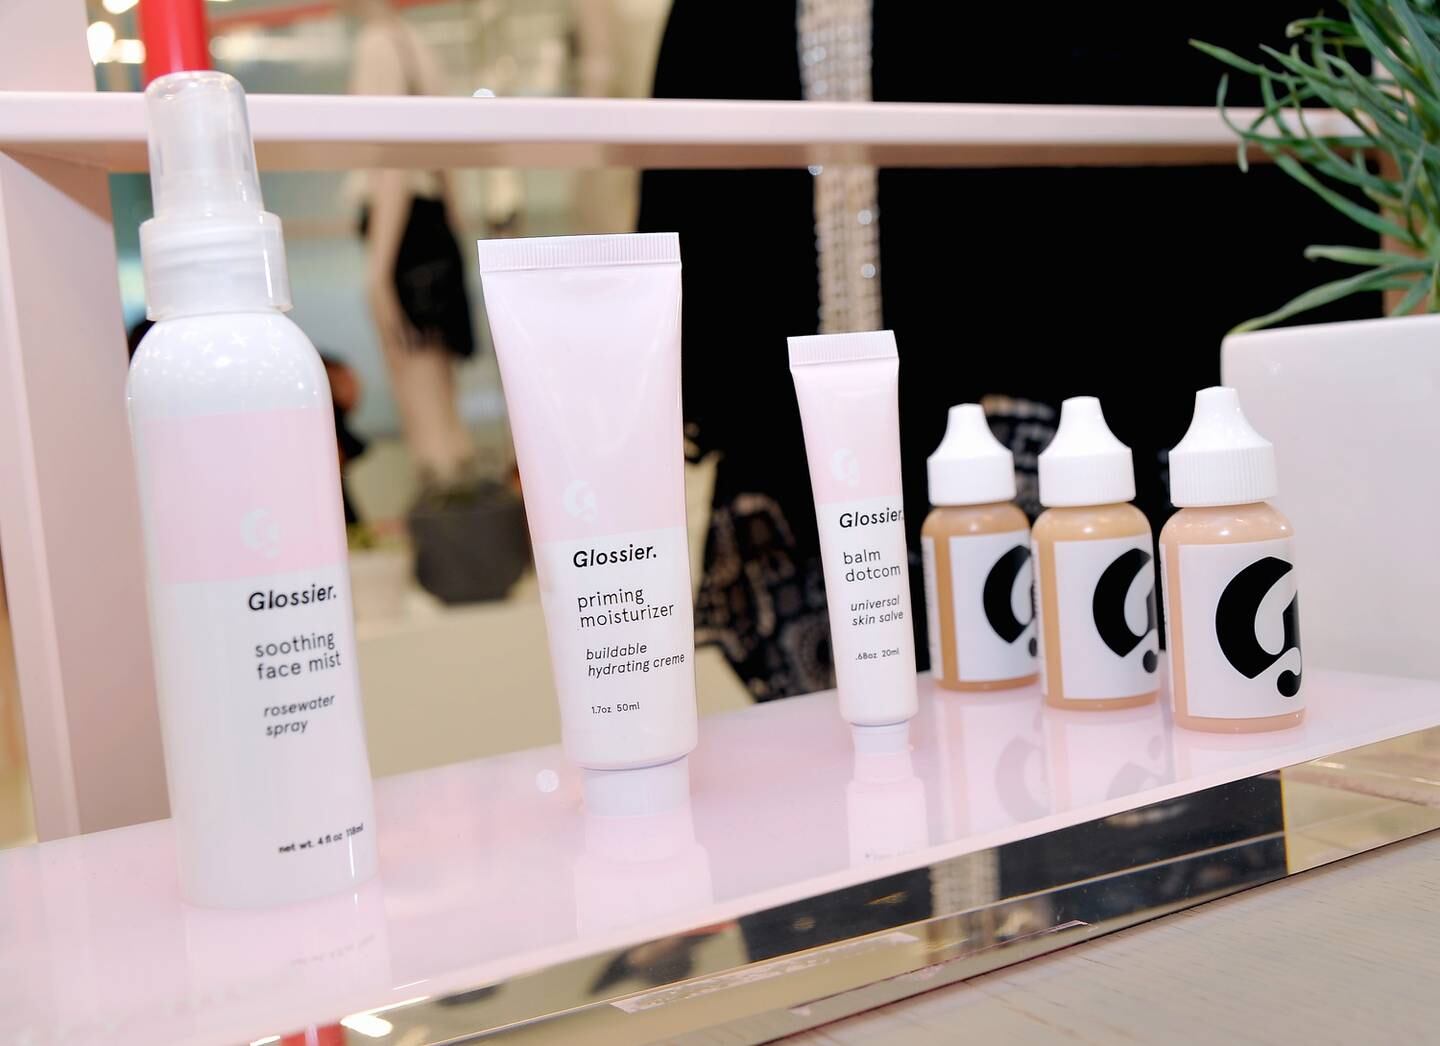 Glossier's original product lineup.